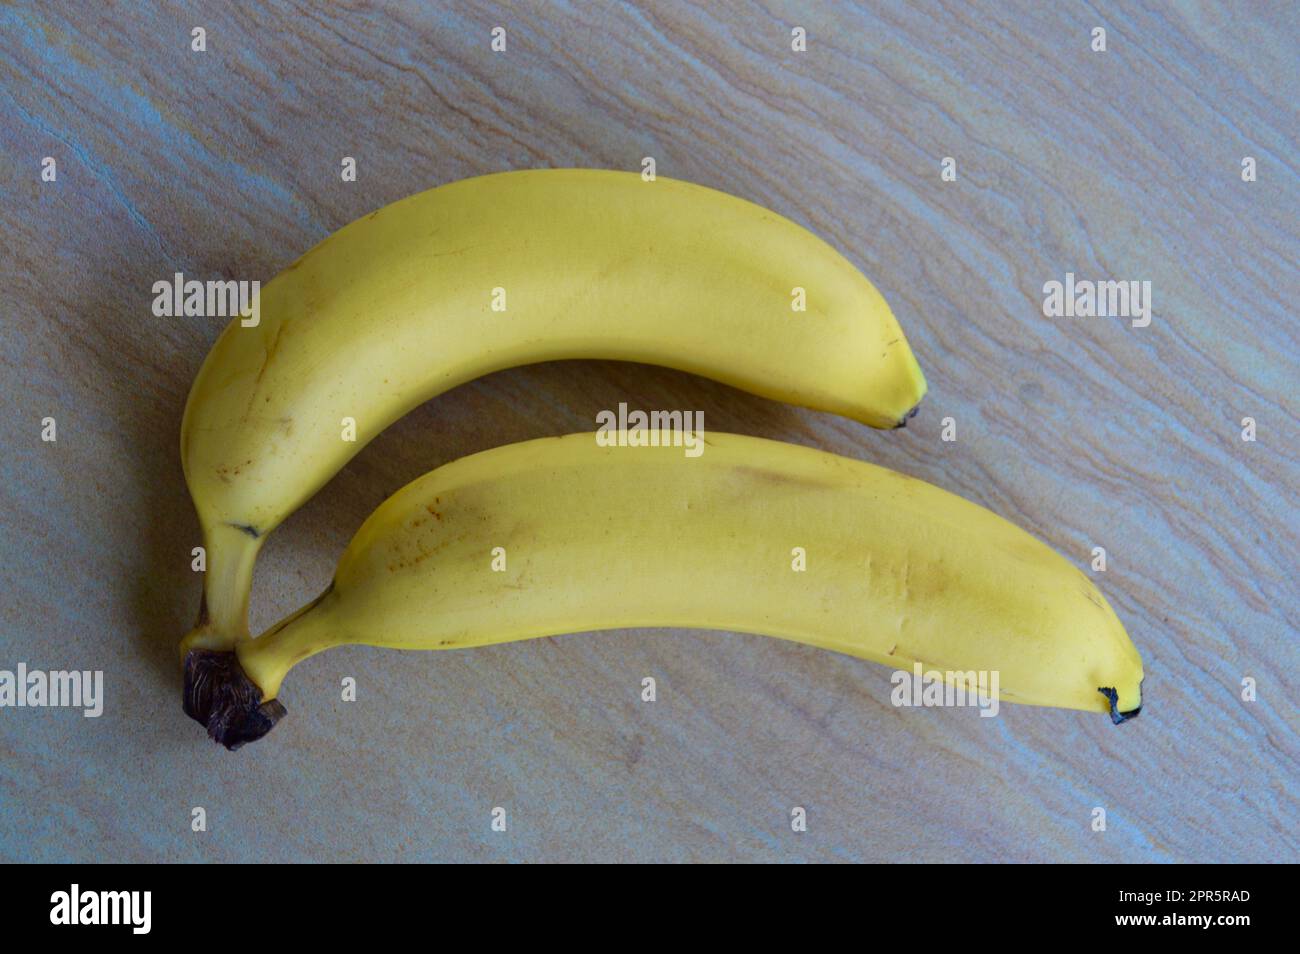 Two ripe bananas set out and ready to eat Stock Photo